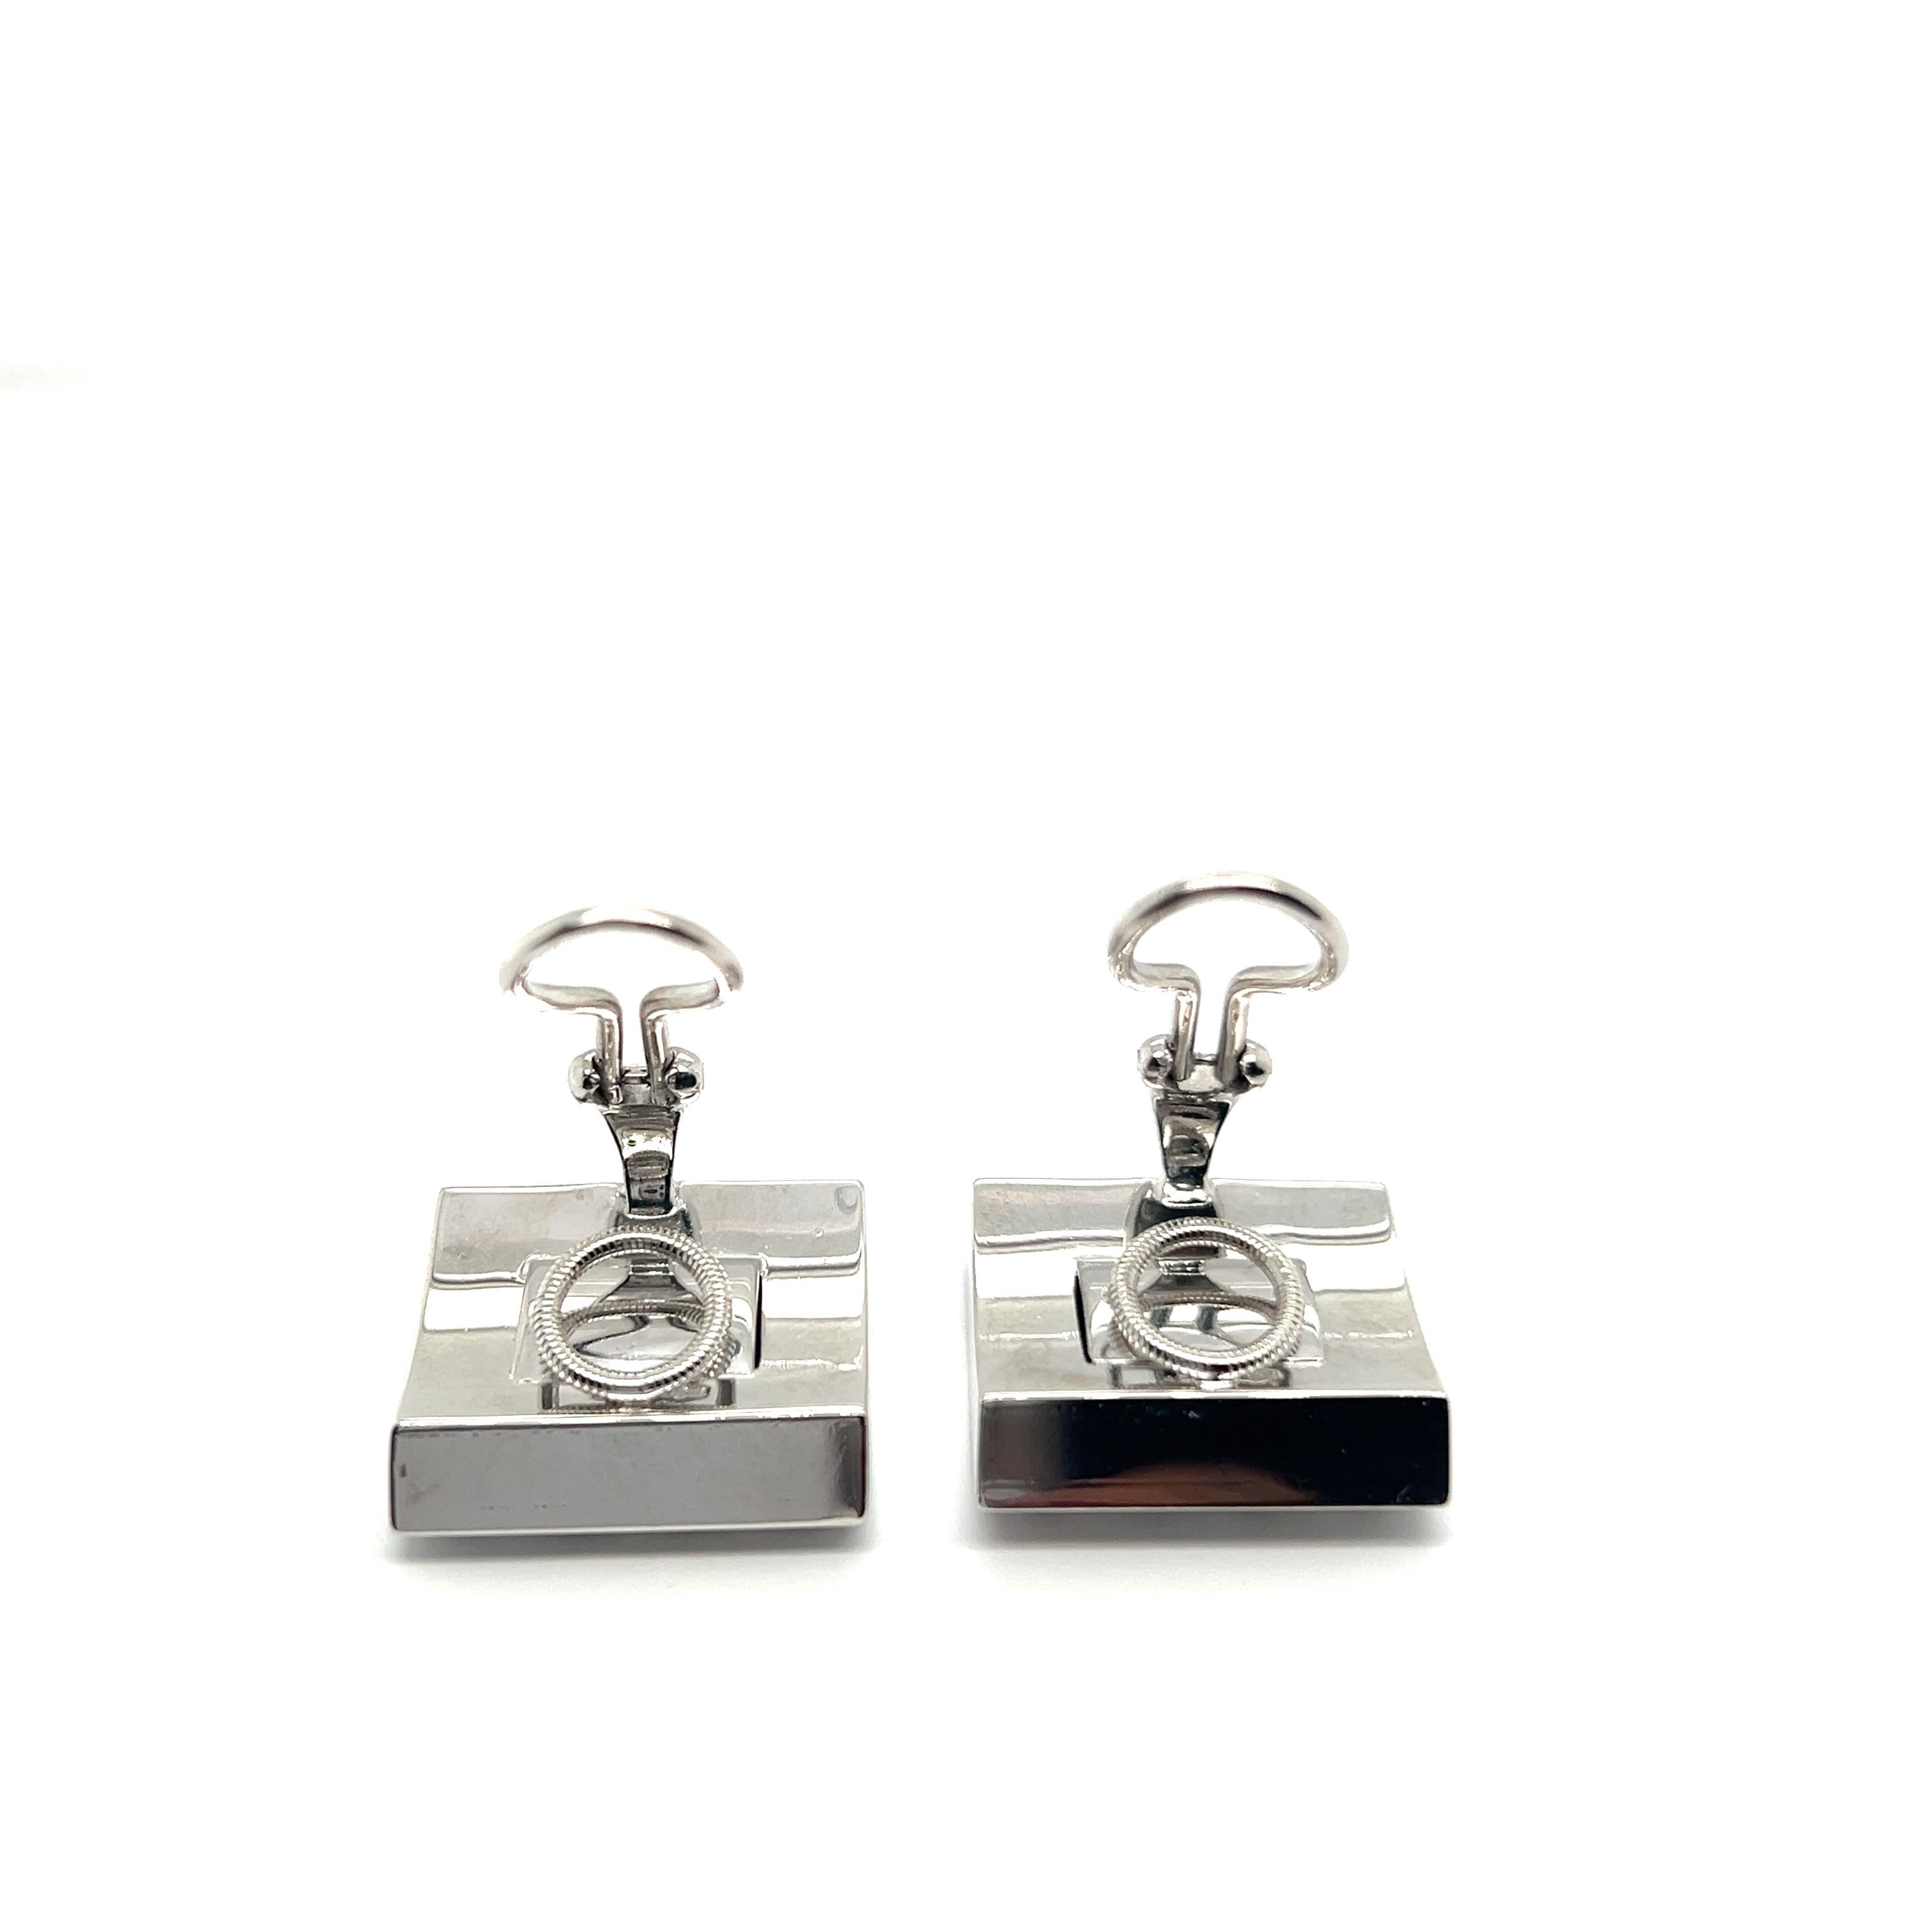  Bold Graphic Earrings with Diamonds in 18 Karat White Gold by Majo Fruithof For Sale 5